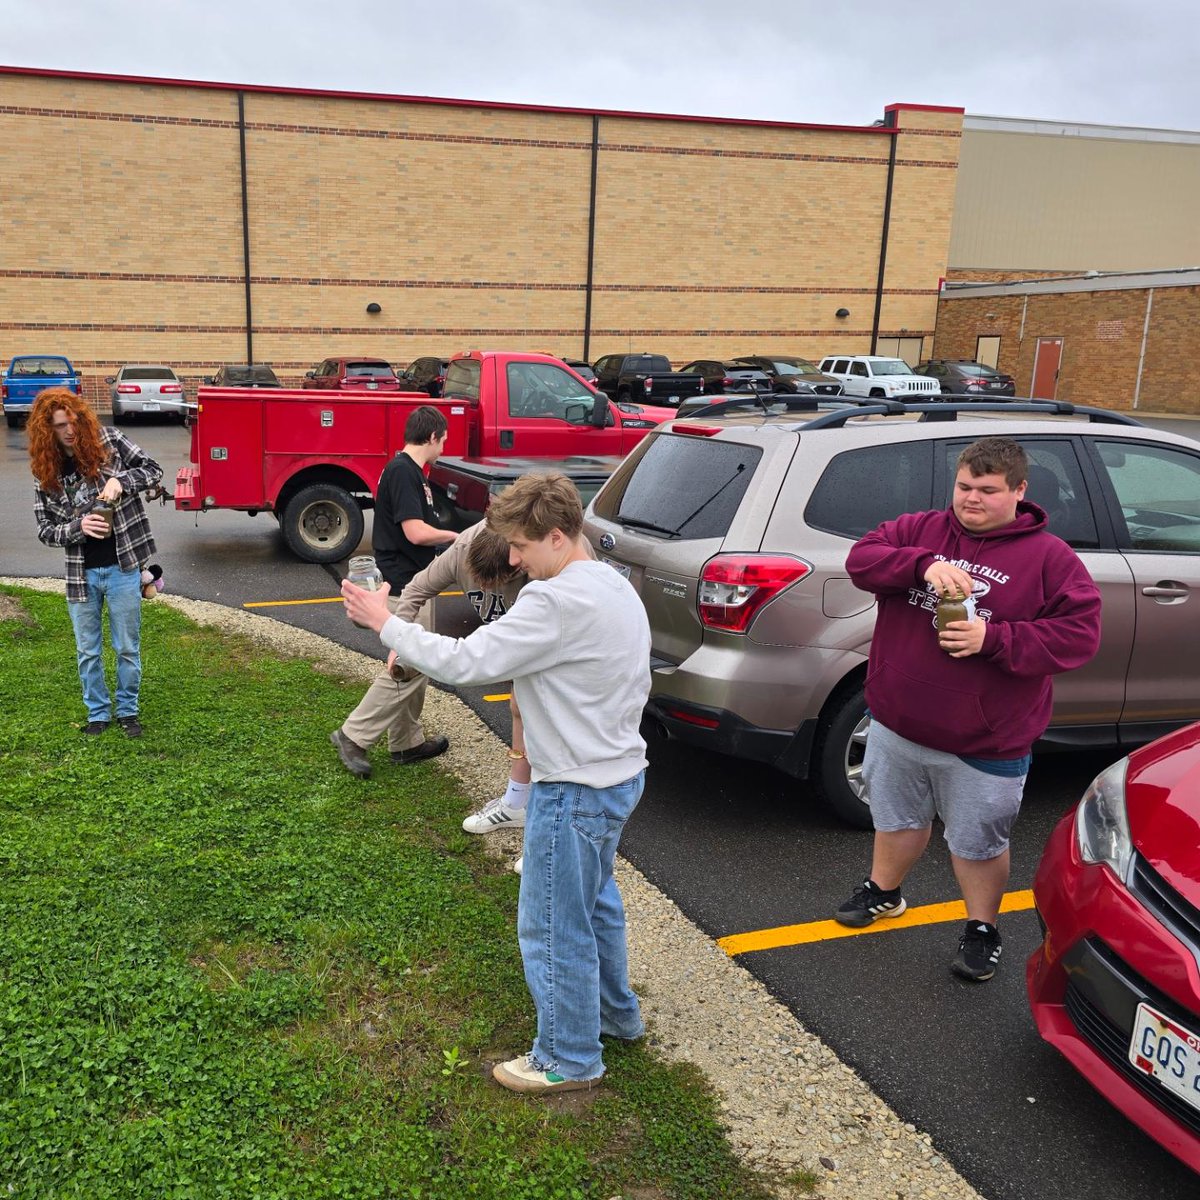 Forestry & Environmental Studies students learning by taking soil samples to test soil and improve the health of lawn, garden, or landscaping. #kentriderpride @kentschools @THSCounselors @CFHS_Counseling @WoodridgeWHS @hudsonohschools @SMFHScounseling @SMFSchools @sixdistrictCTE